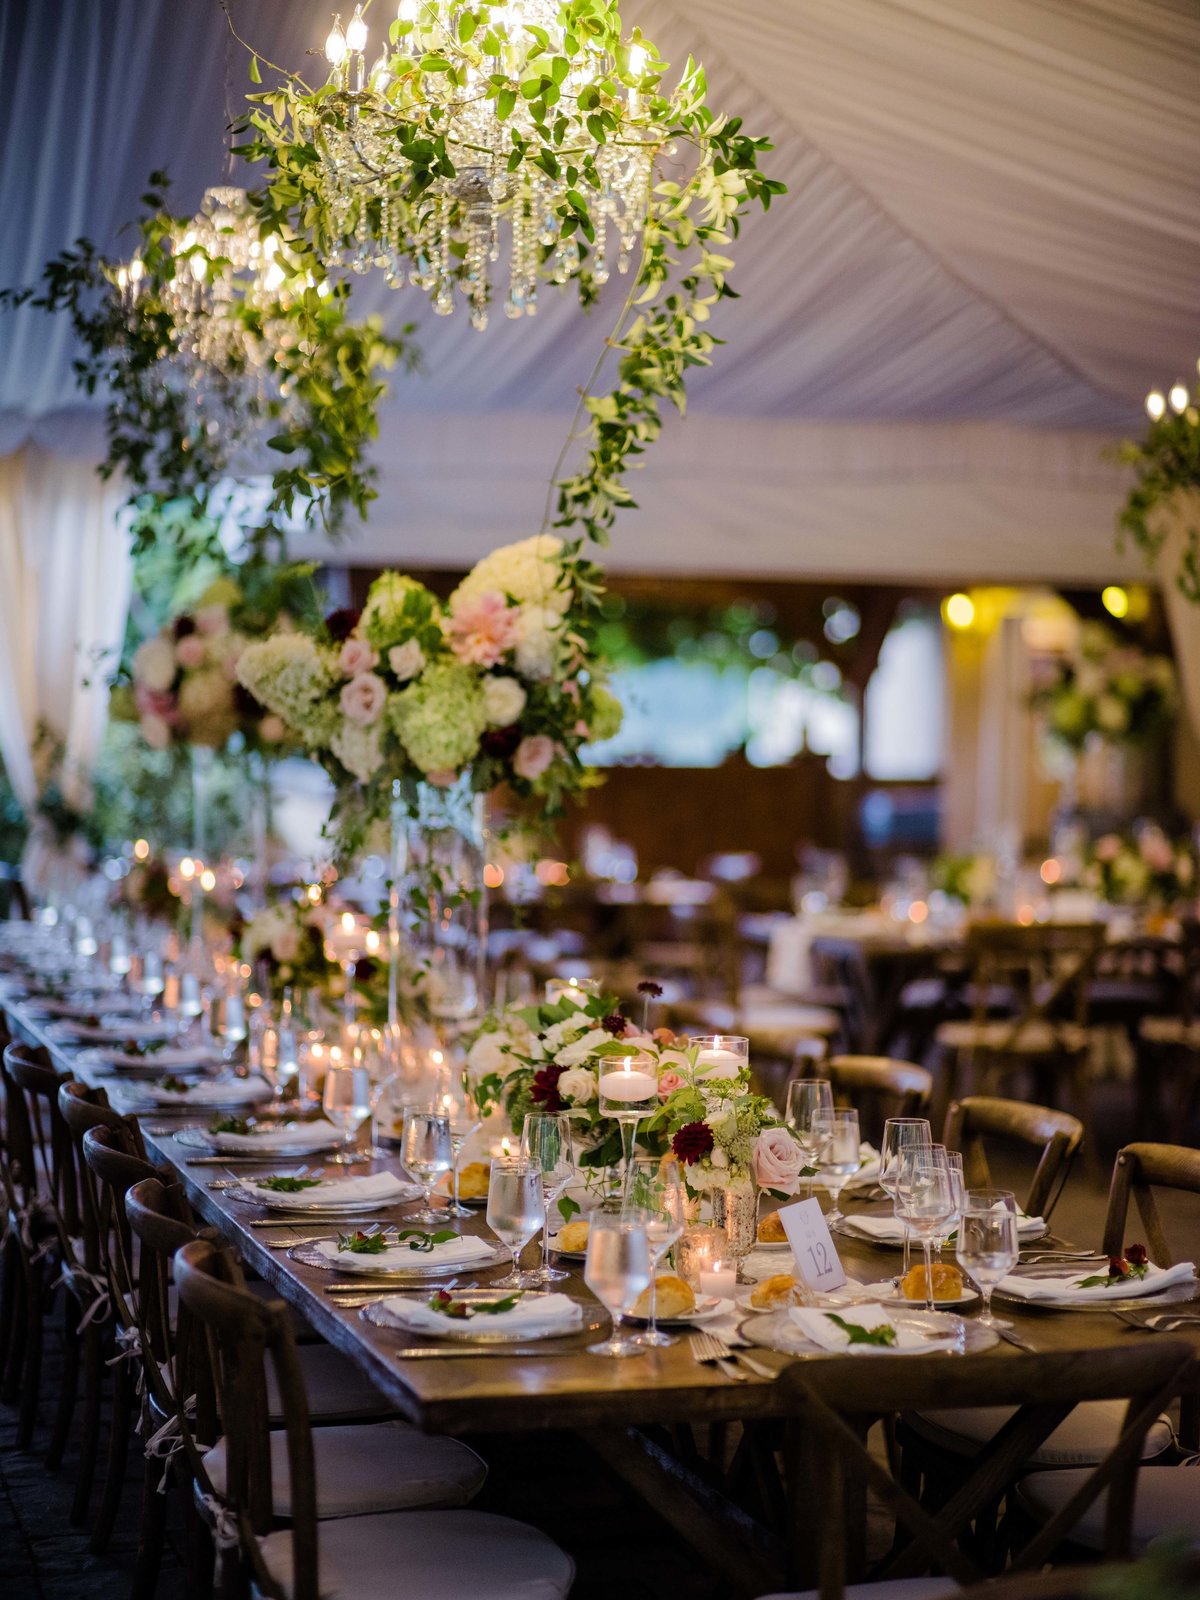 Tall dahlia, rose, and pee gee hydrangea floral arrangements line the long tables.